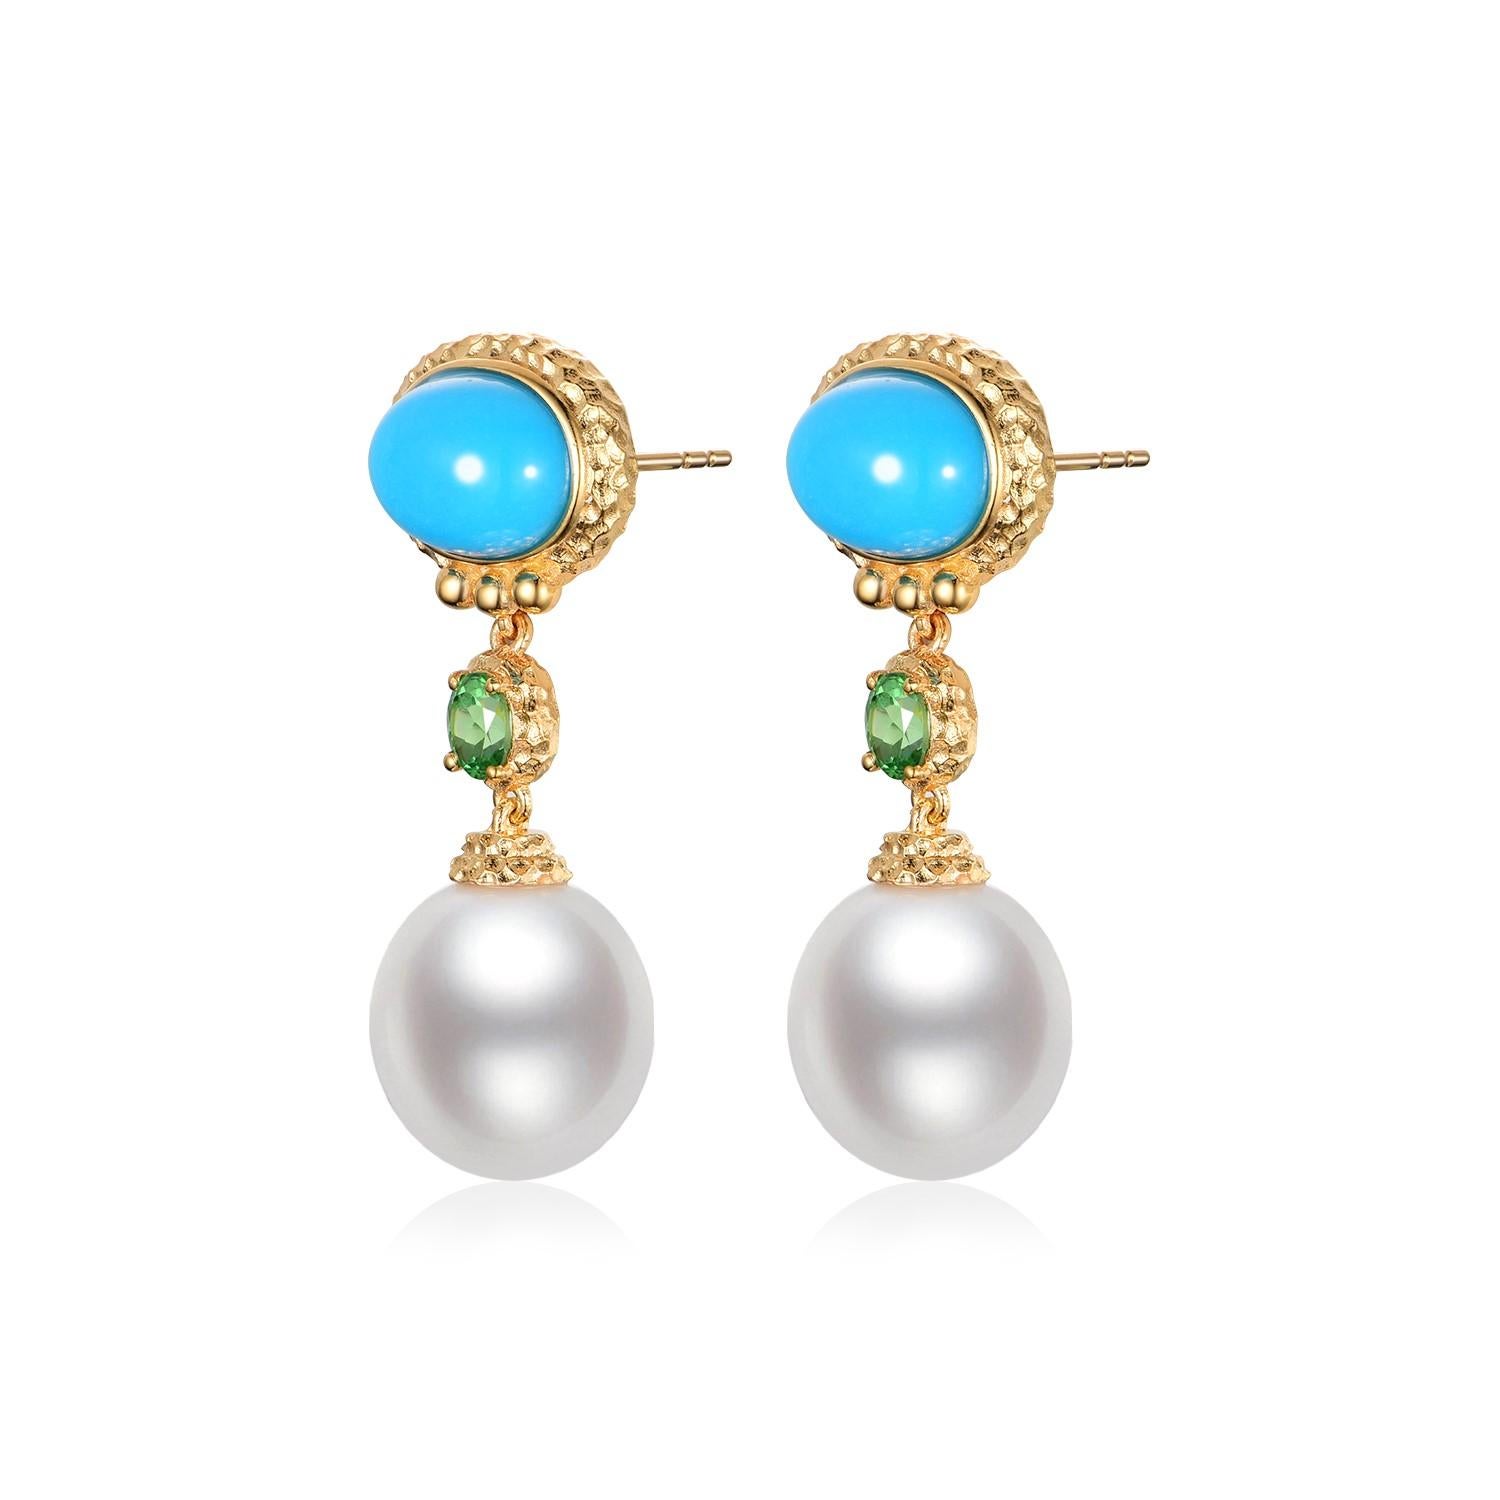 These drop earrings are a masterpiece of color and elegance, featuring an alluring combination of the ocean and earth's treasures set in the warm glow of 18K gold vermeil over sterling silver. At the heart of each earring is a lustrous 11mm South